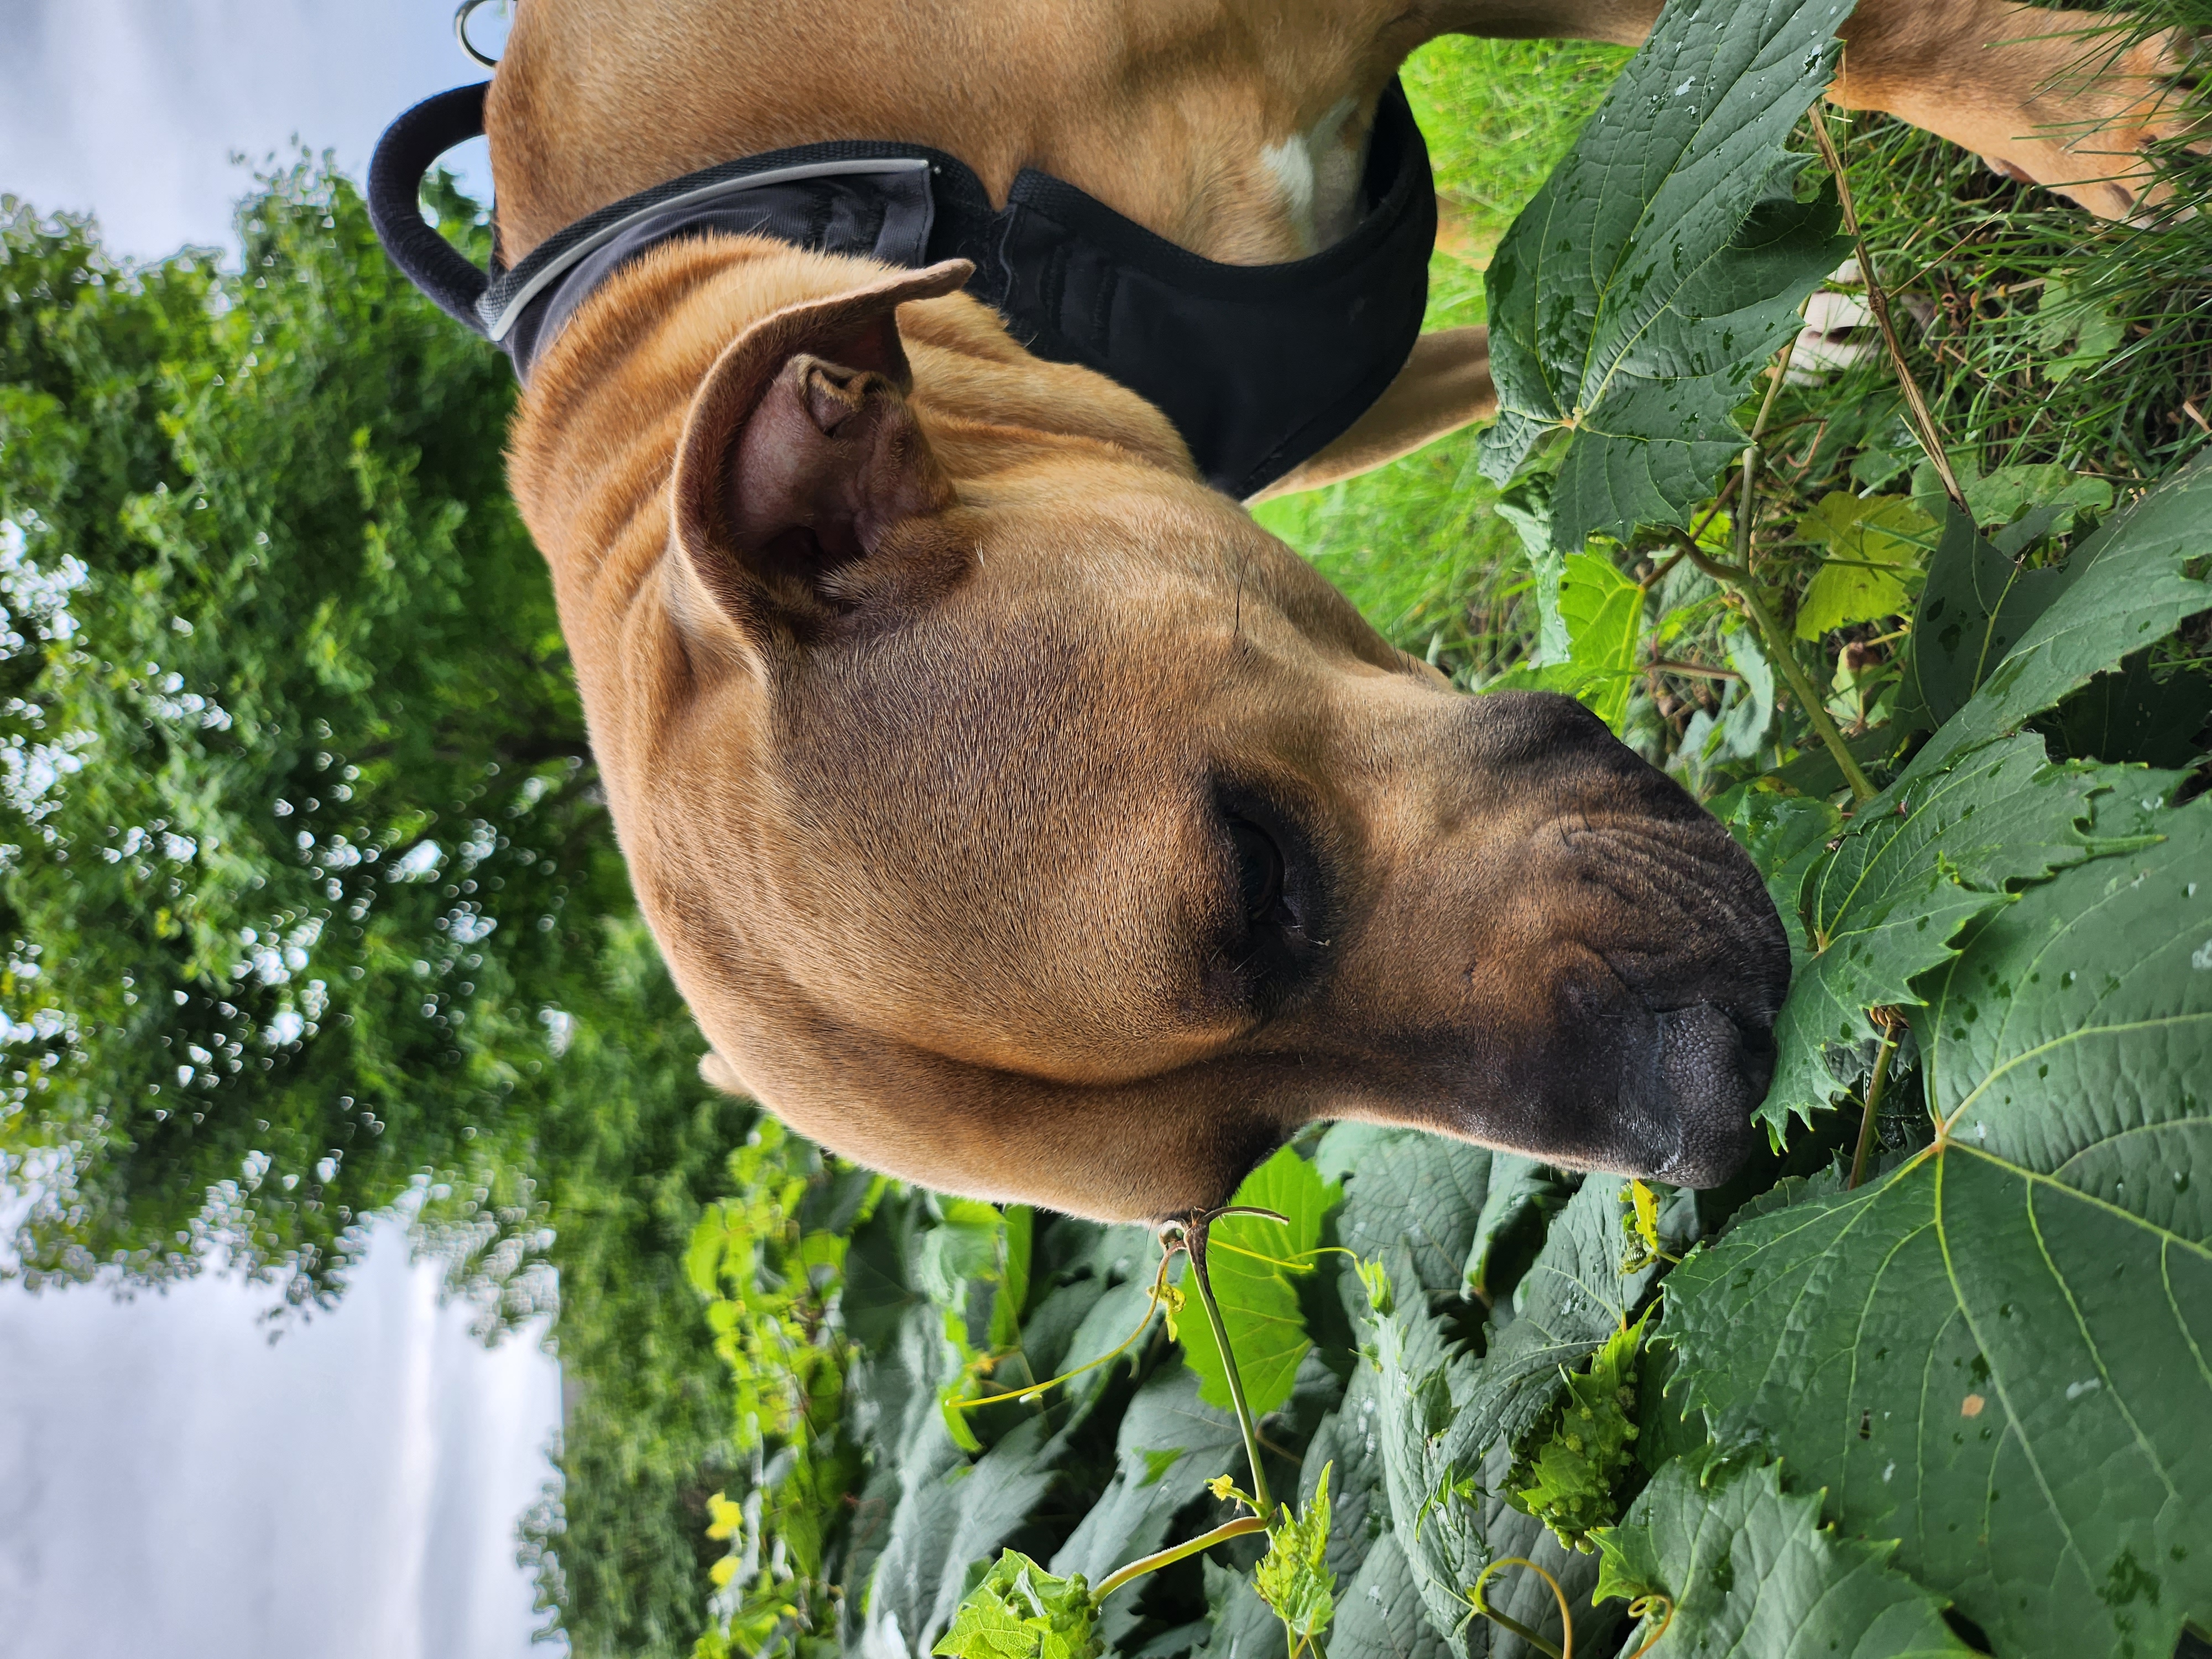 Photo of a dog sniffing grass, taken with the Galaxy Z Flip 4.